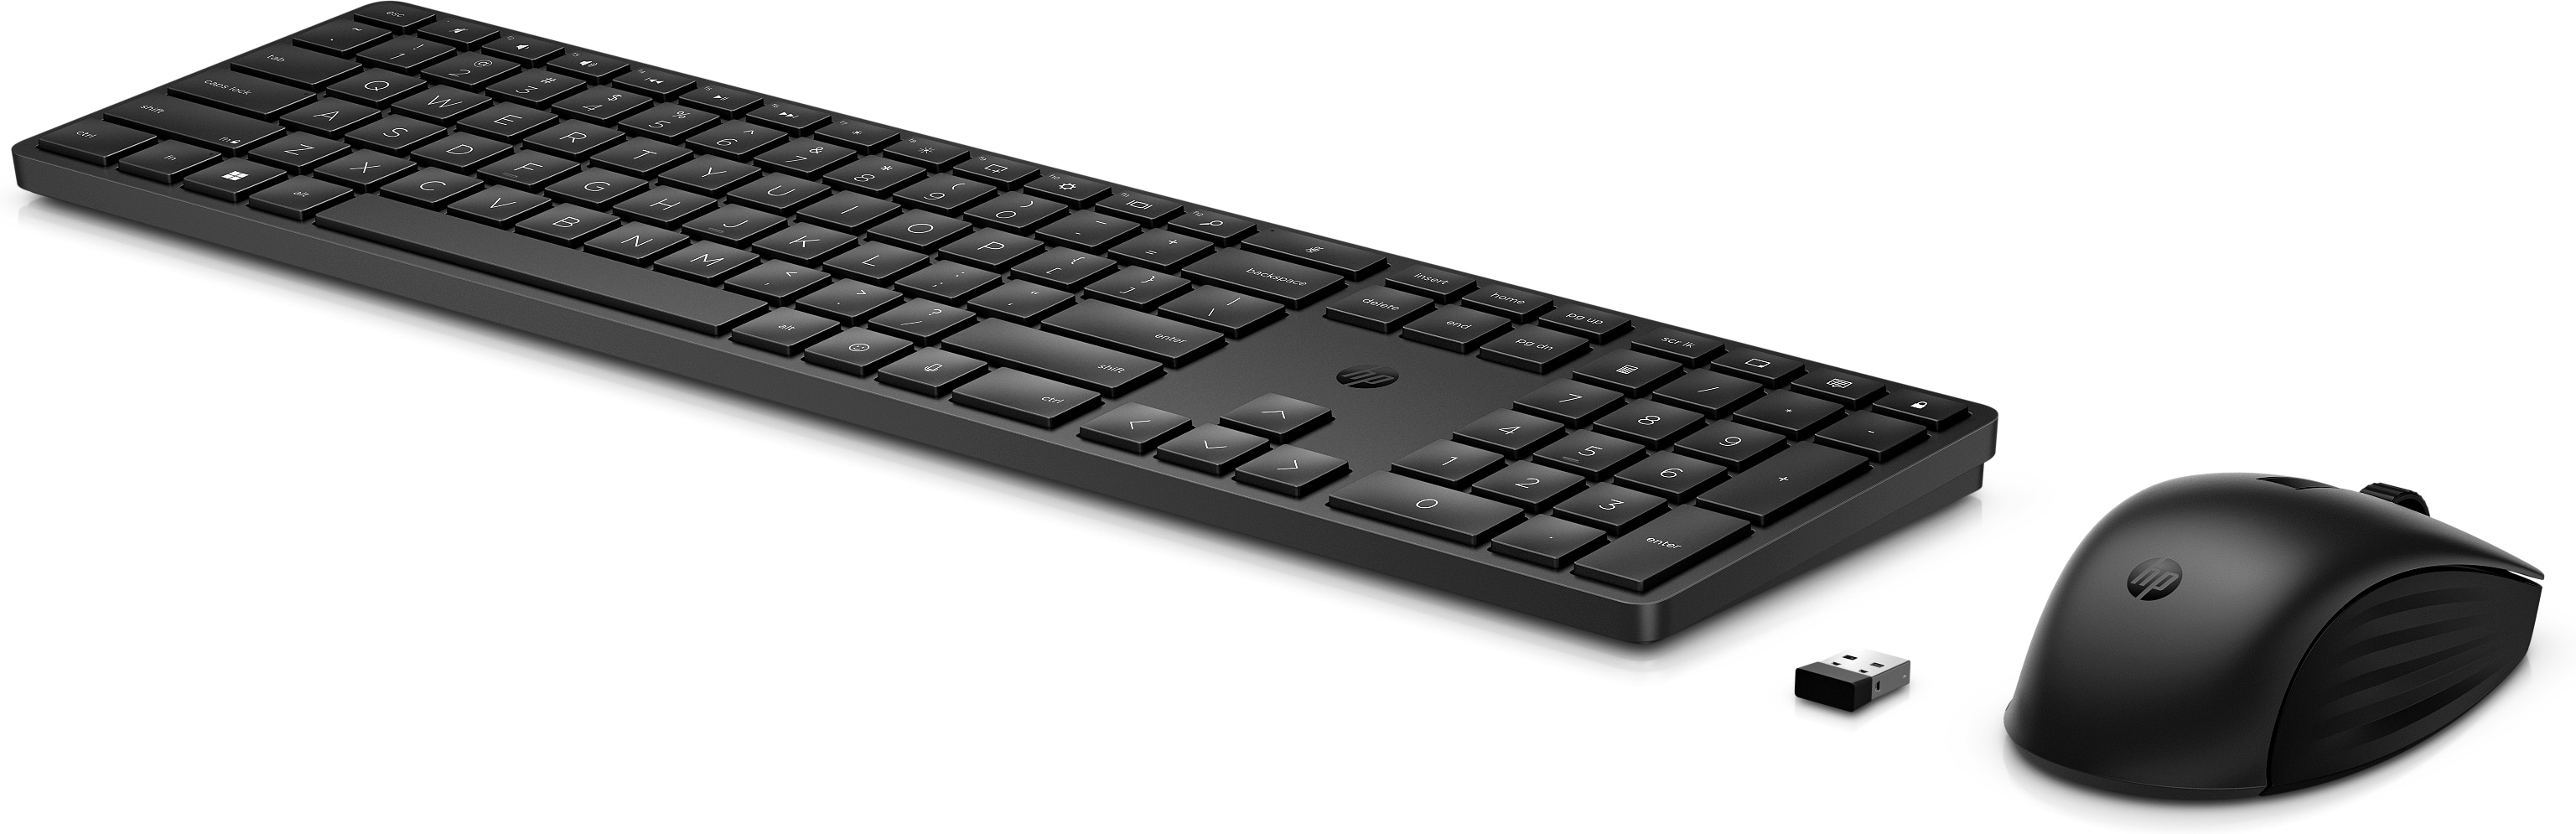 HP 655 Wireless Keyboard Mouse Combo and